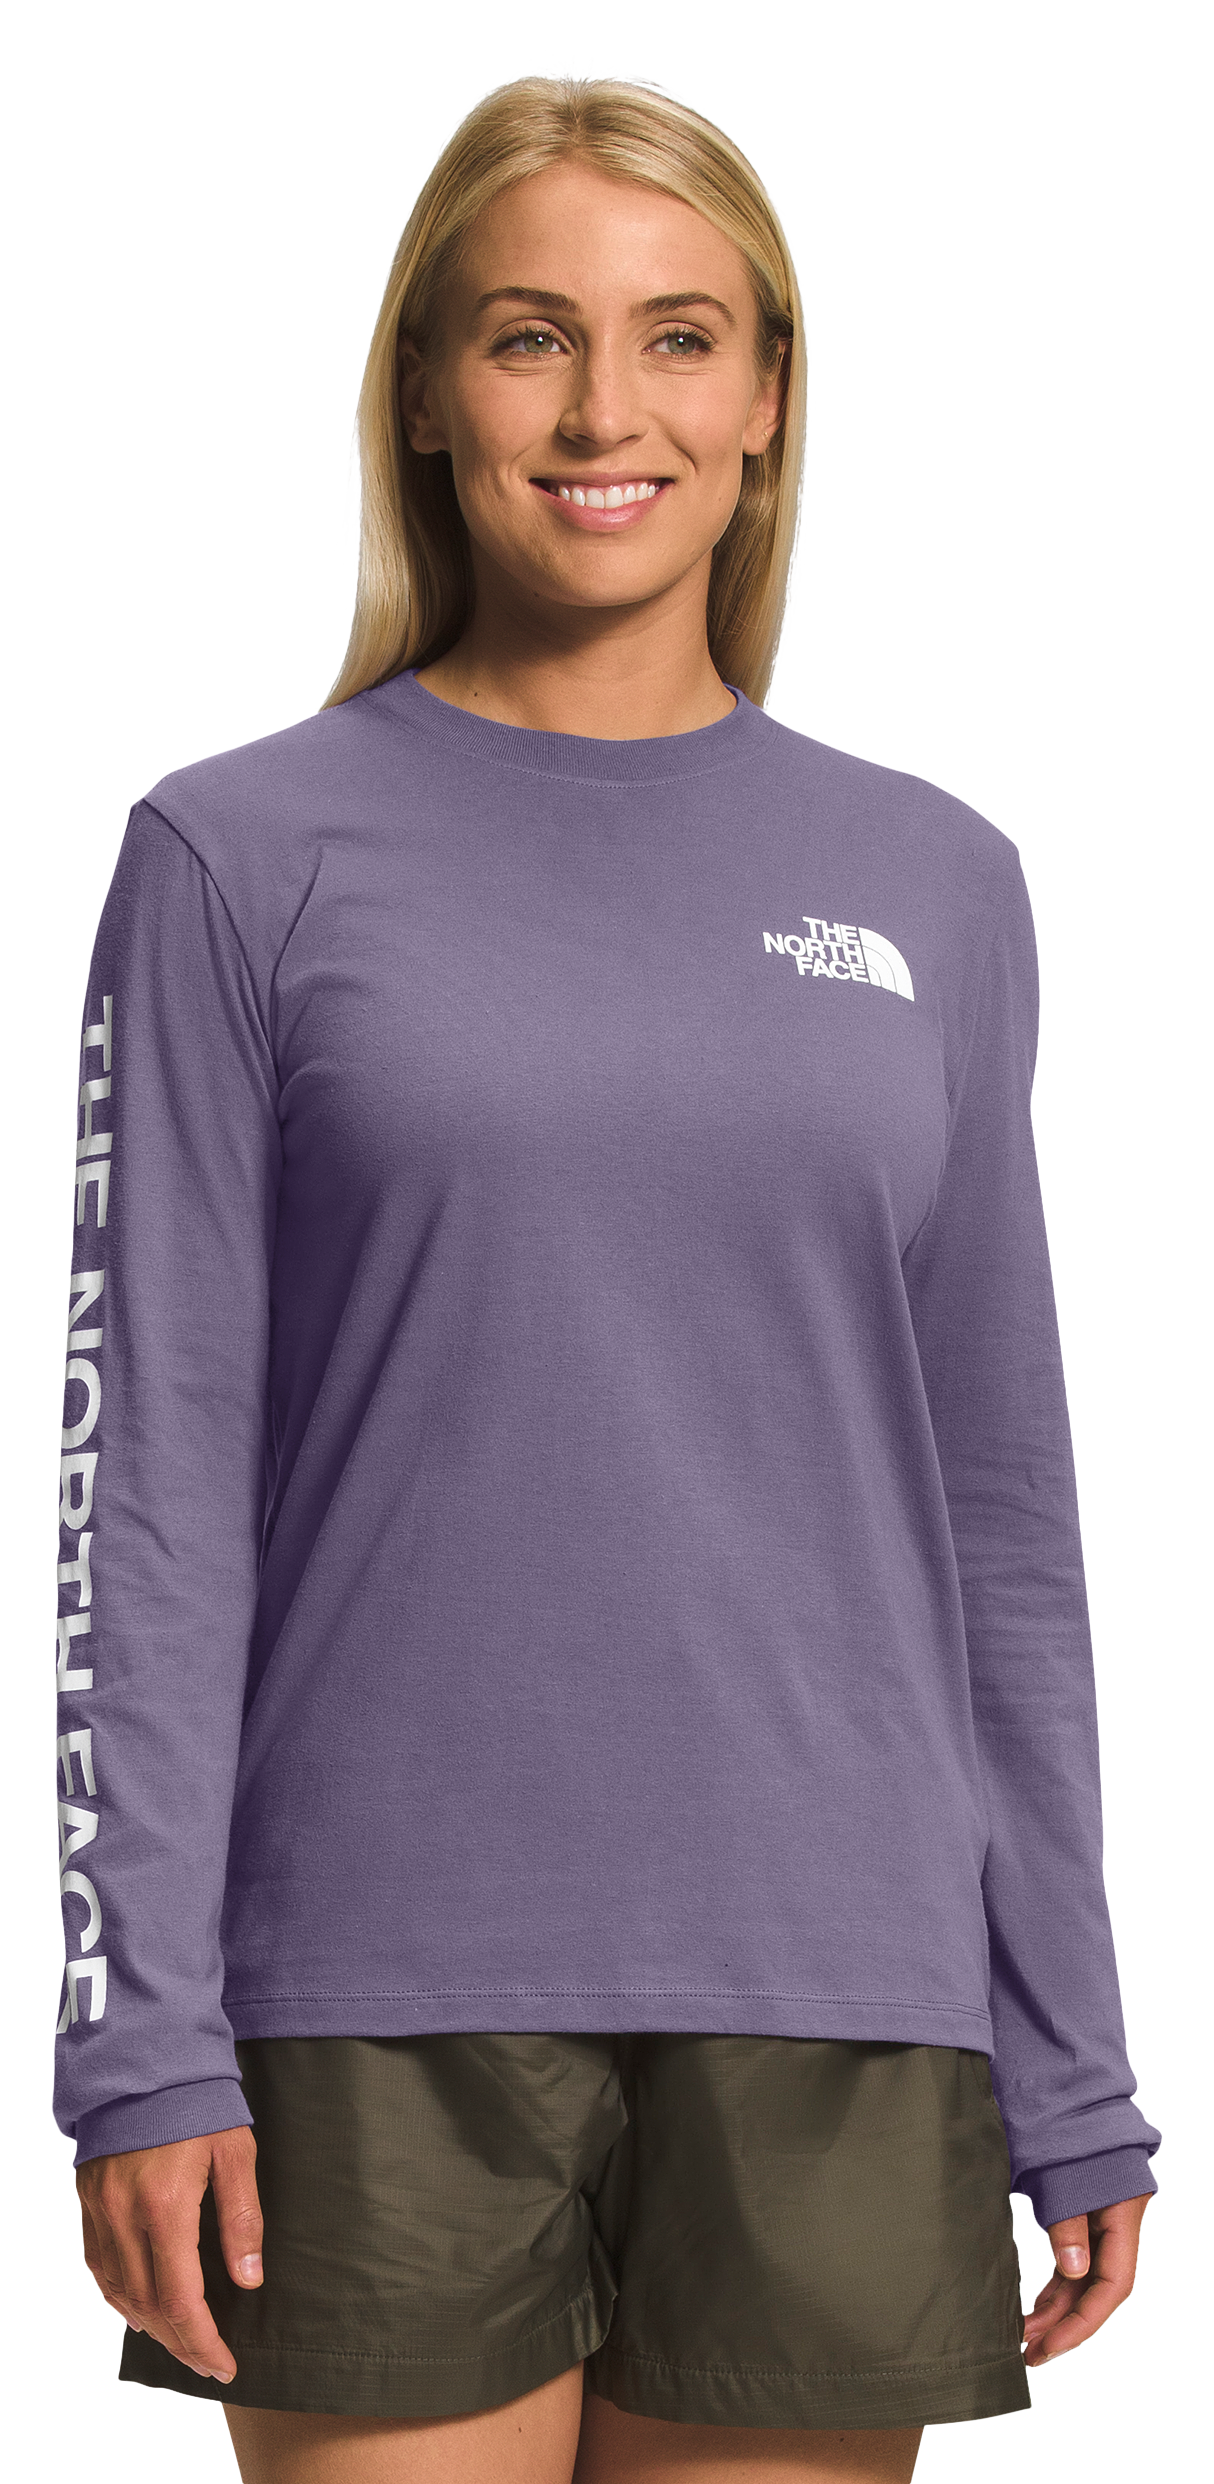 The North Face Hit Graphic Long-Sleeve T-Shirt for Ladies - Lunar Slate/TNF White - XL